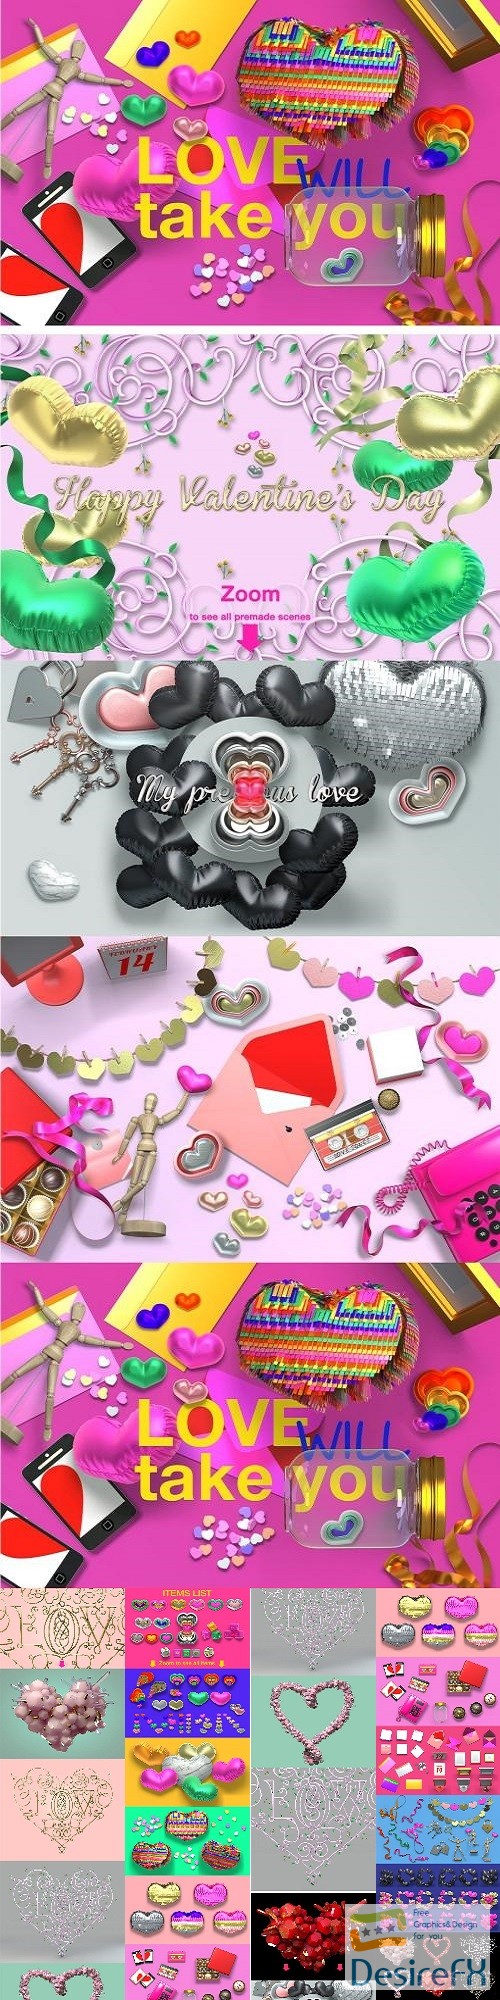 Super fancy Valentine's Day Pack - 2278661 (Full Collection)